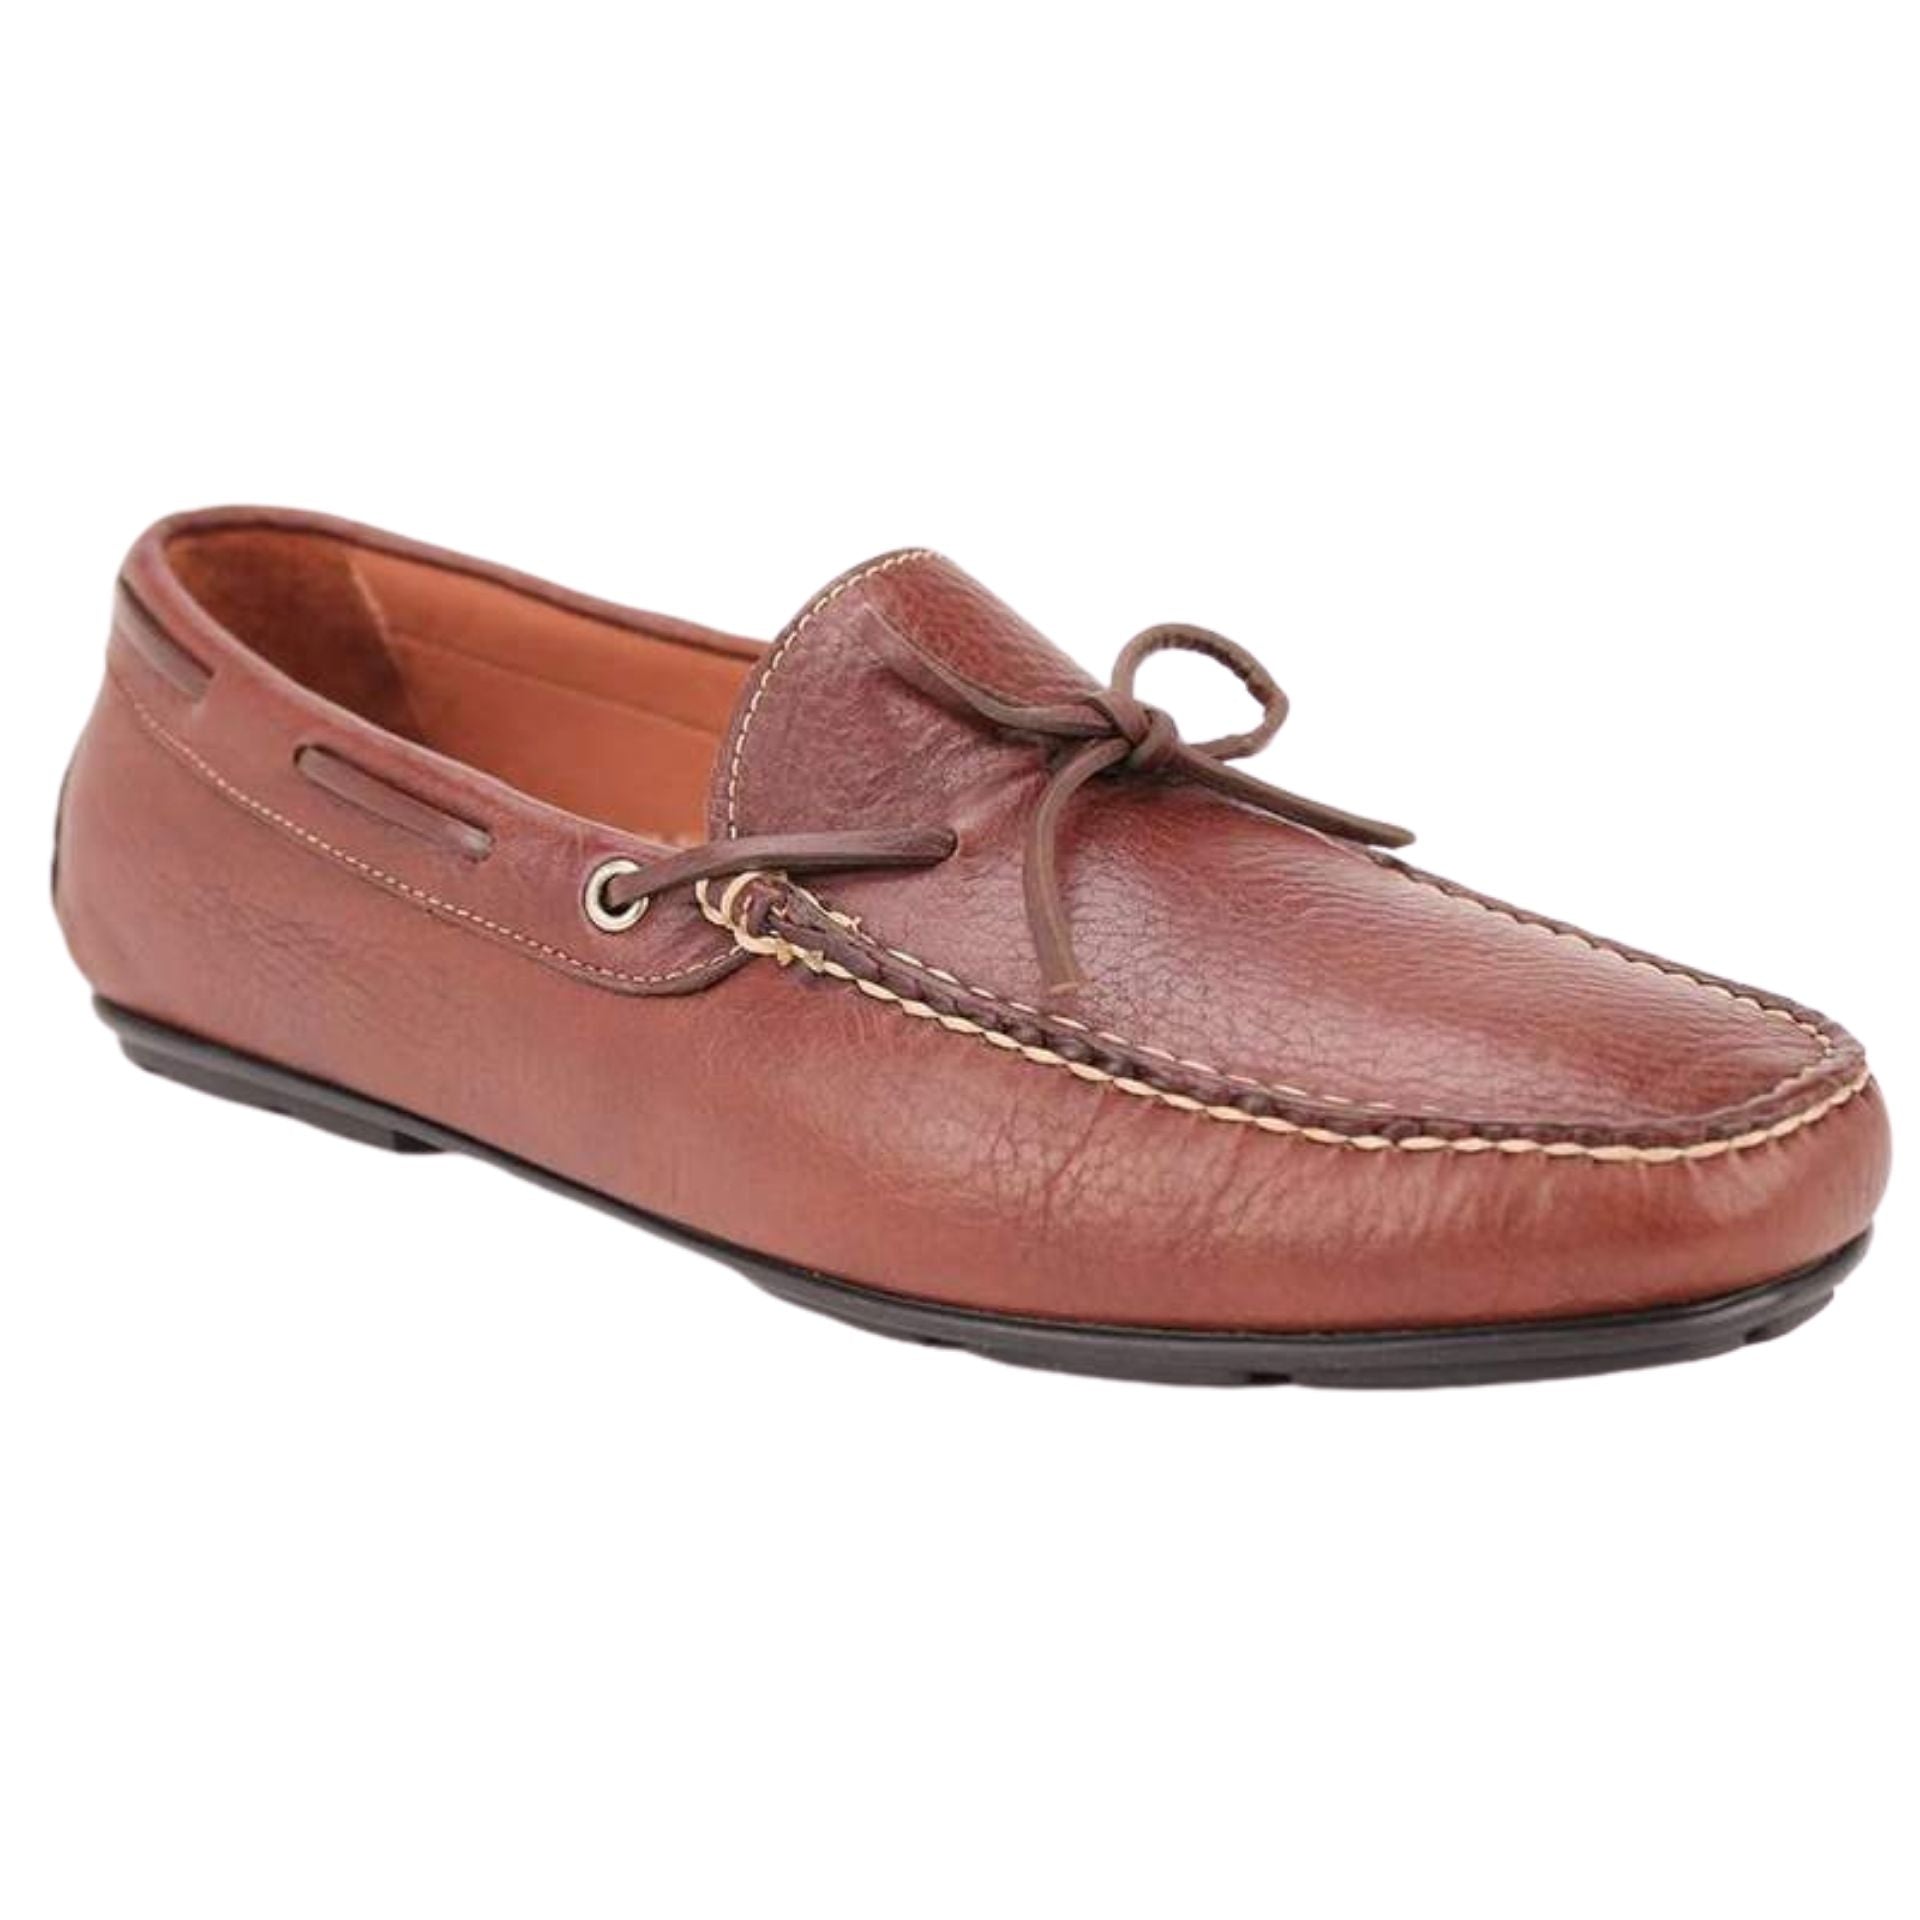 Men's Verona Driving Moccasins in Brown by Country Club Prep - Country Club Prep